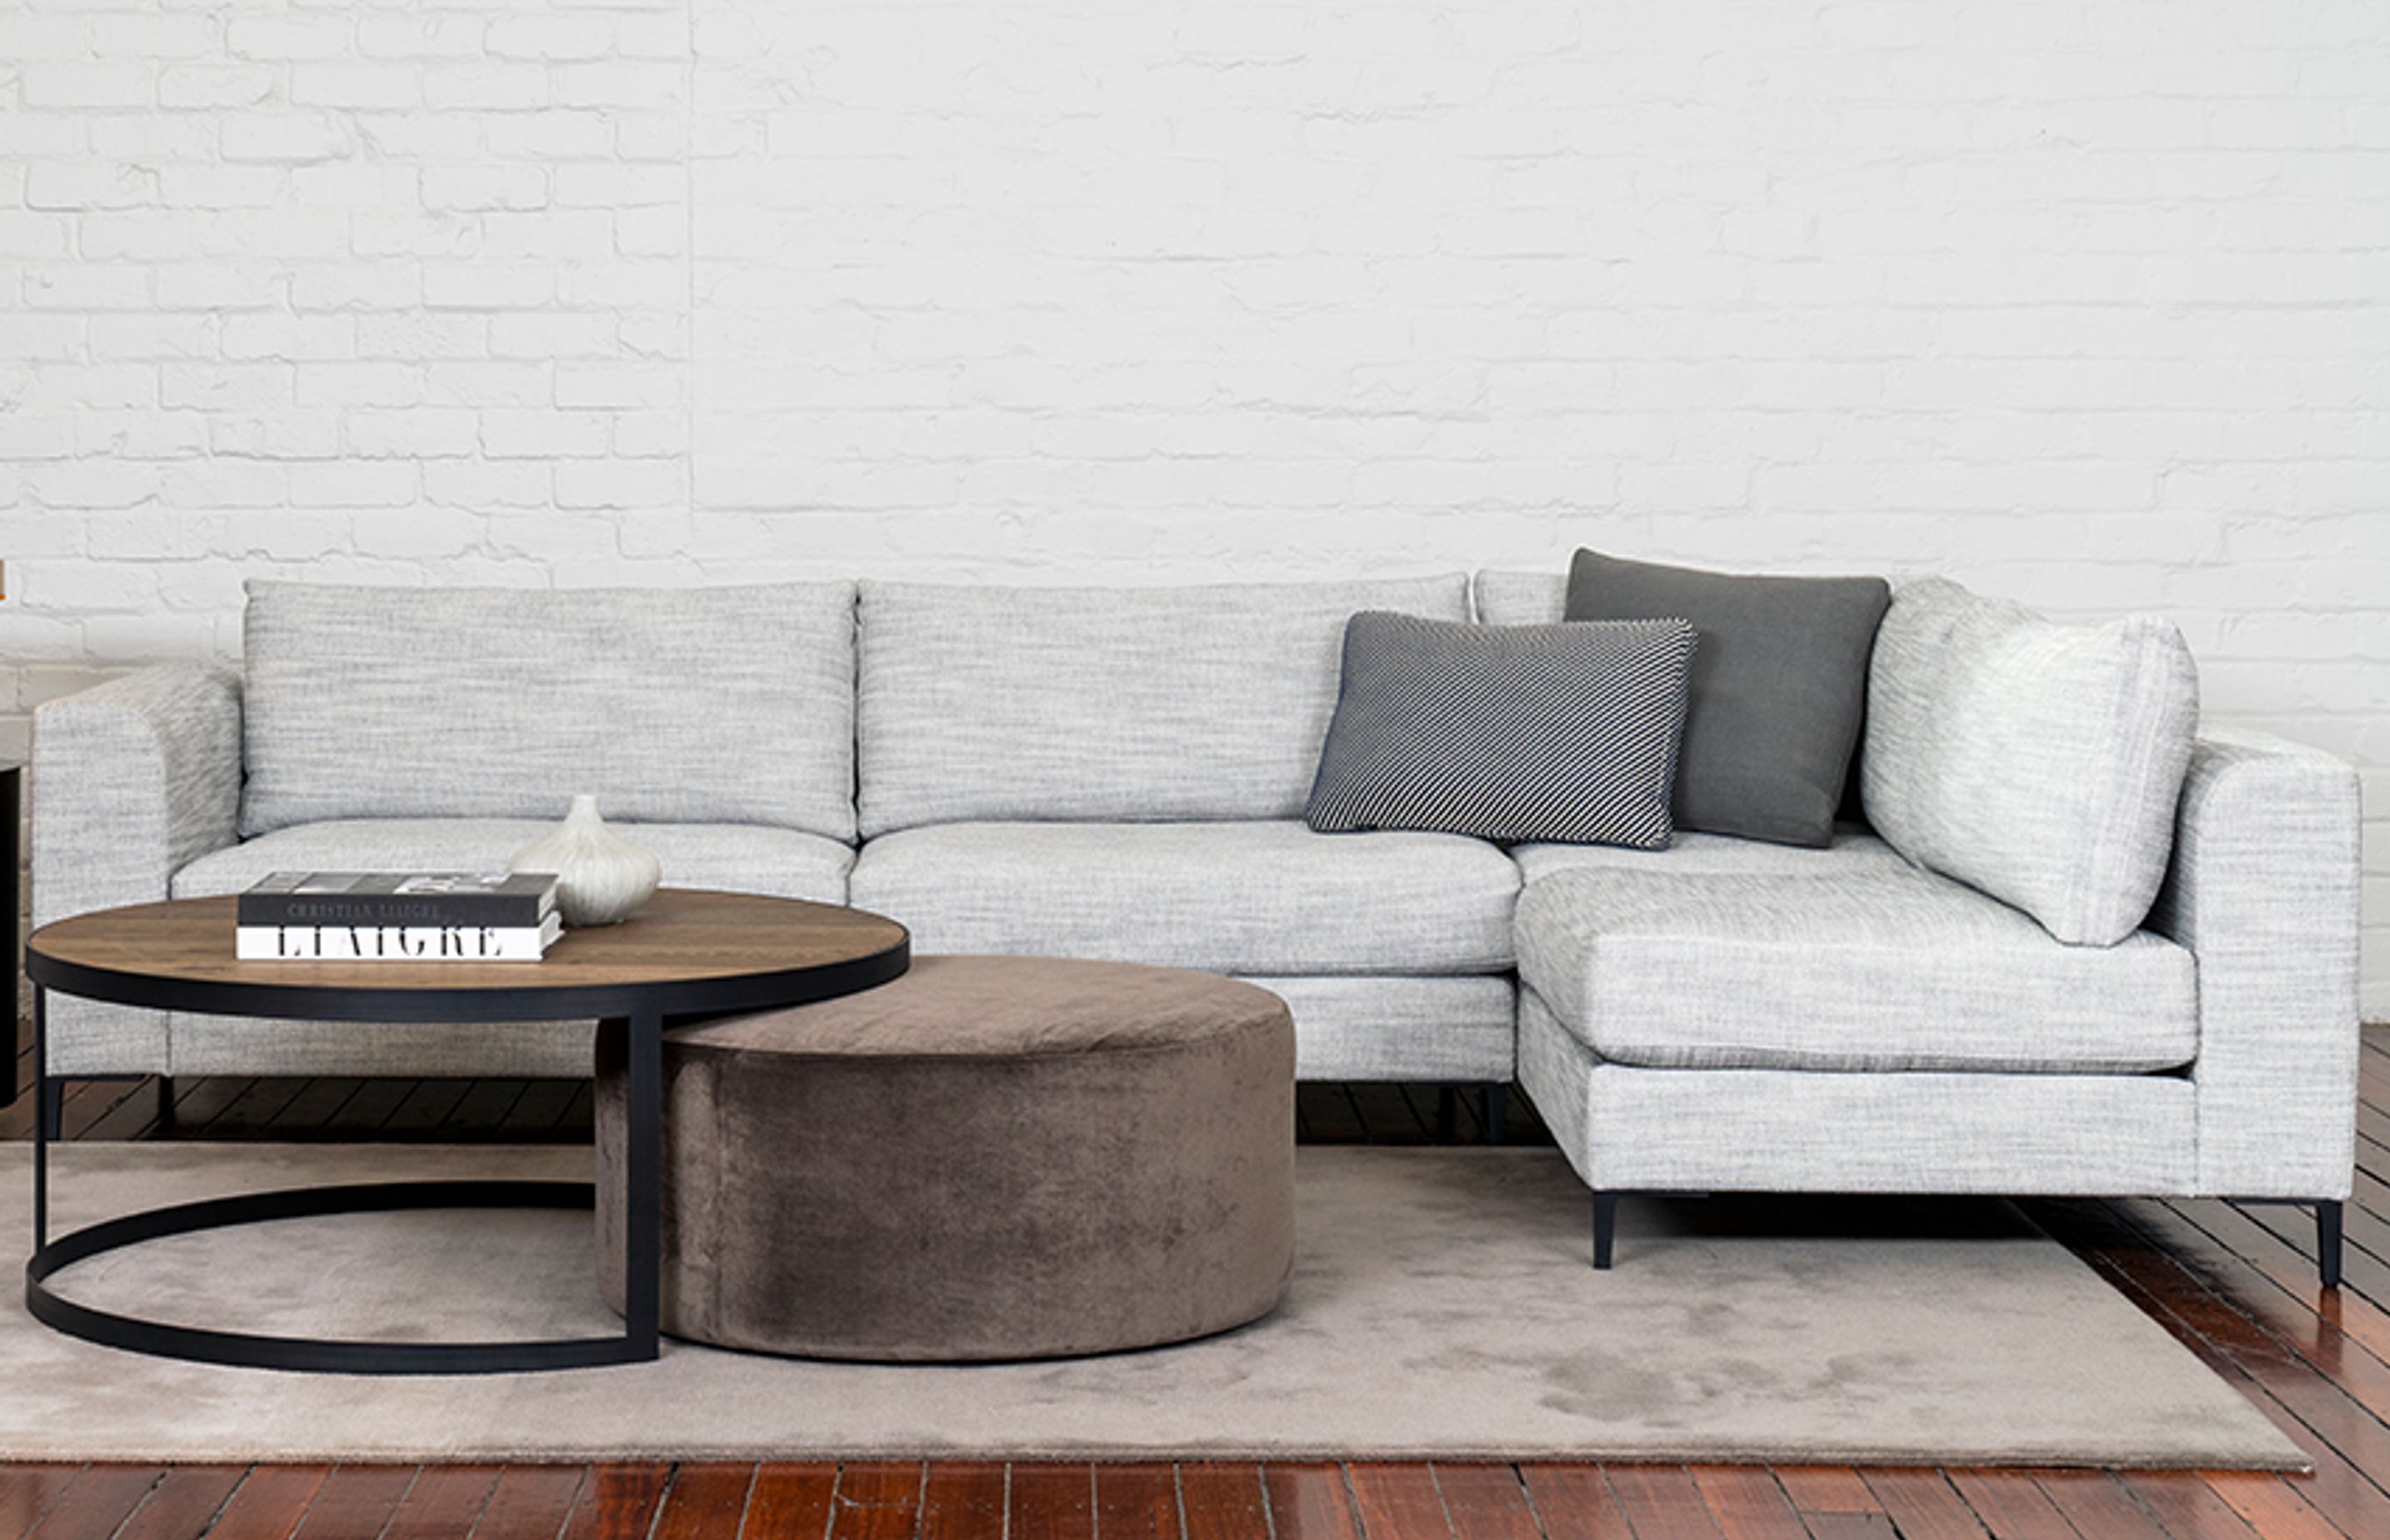 Nazare is a highly tailored sectional sofa with luxurious feather-infused cushioning to provide a soft, relaxed seating experience in sophisticated contemporary surroundings.